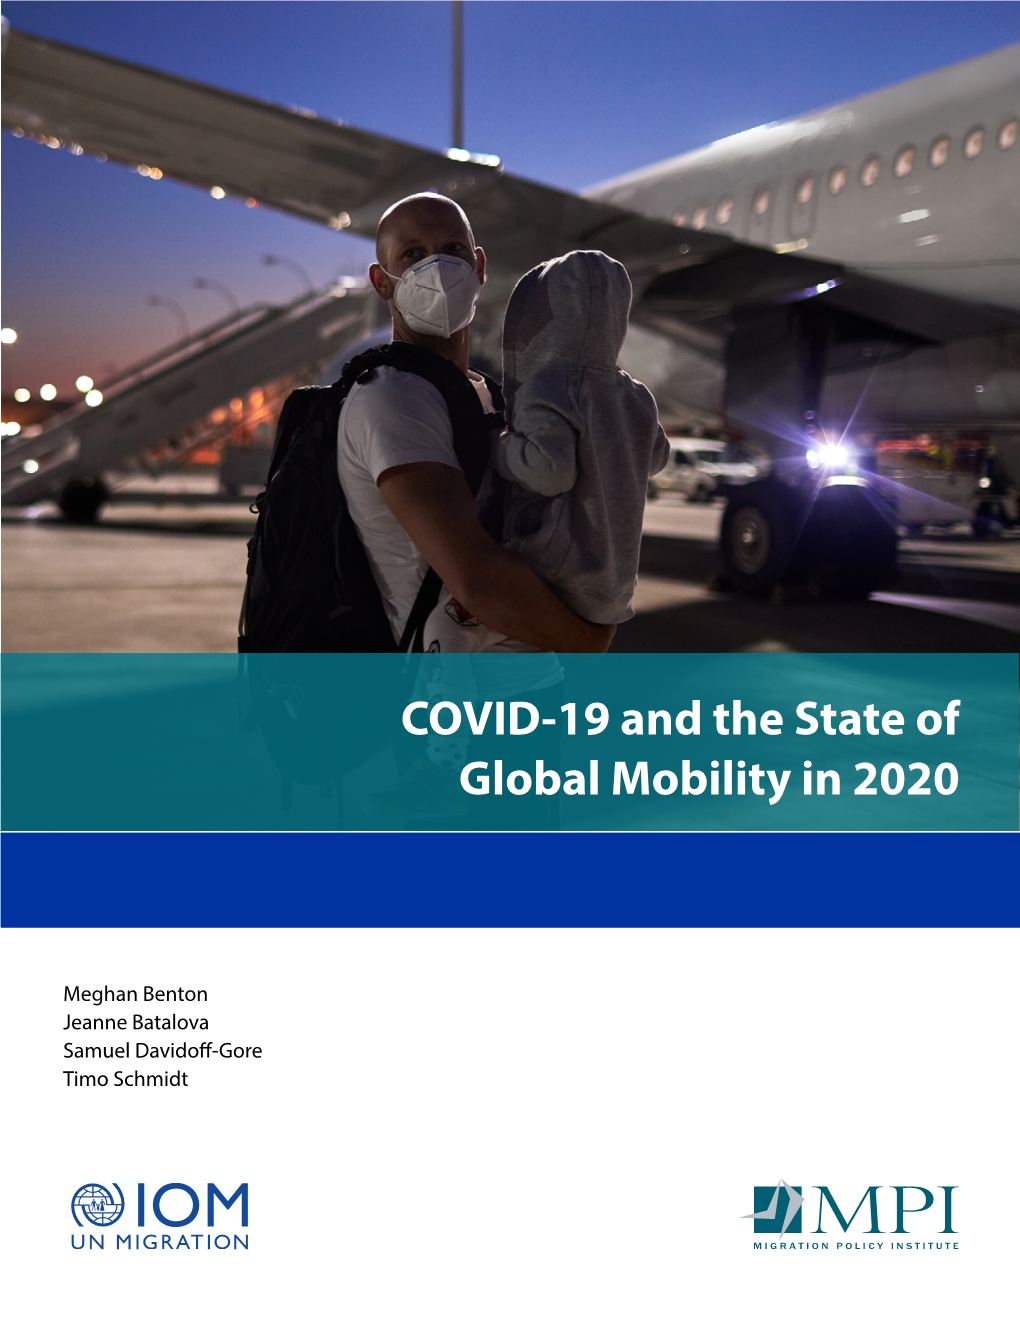 COVID-19 and the State of Global Mobility in 2020